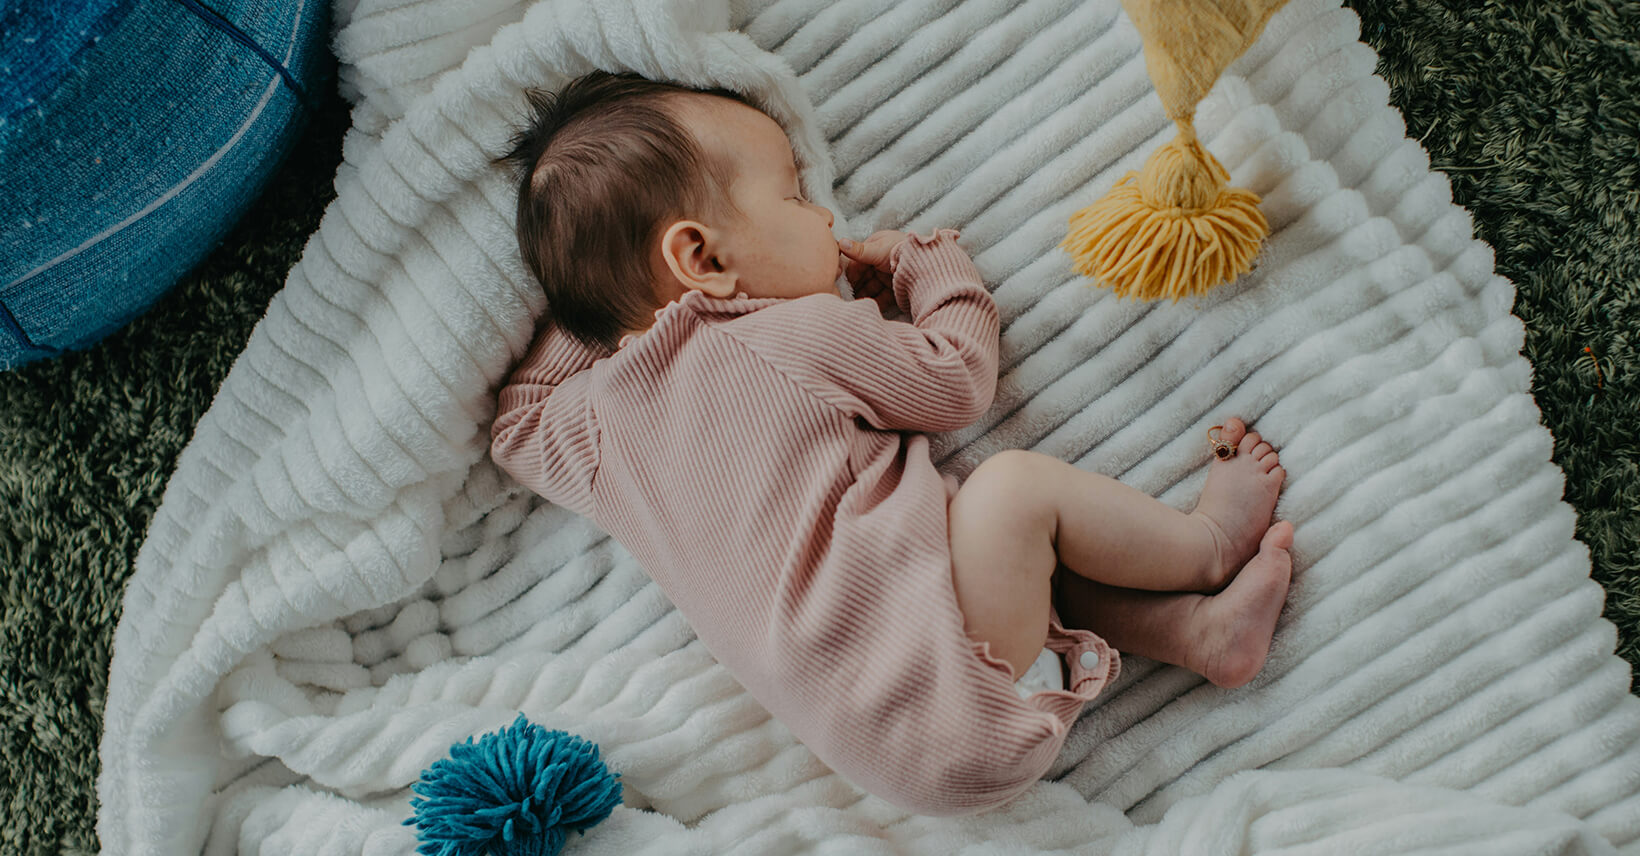 Should You Be Concerned If Your Baby Is Sleeping More Than Usual?